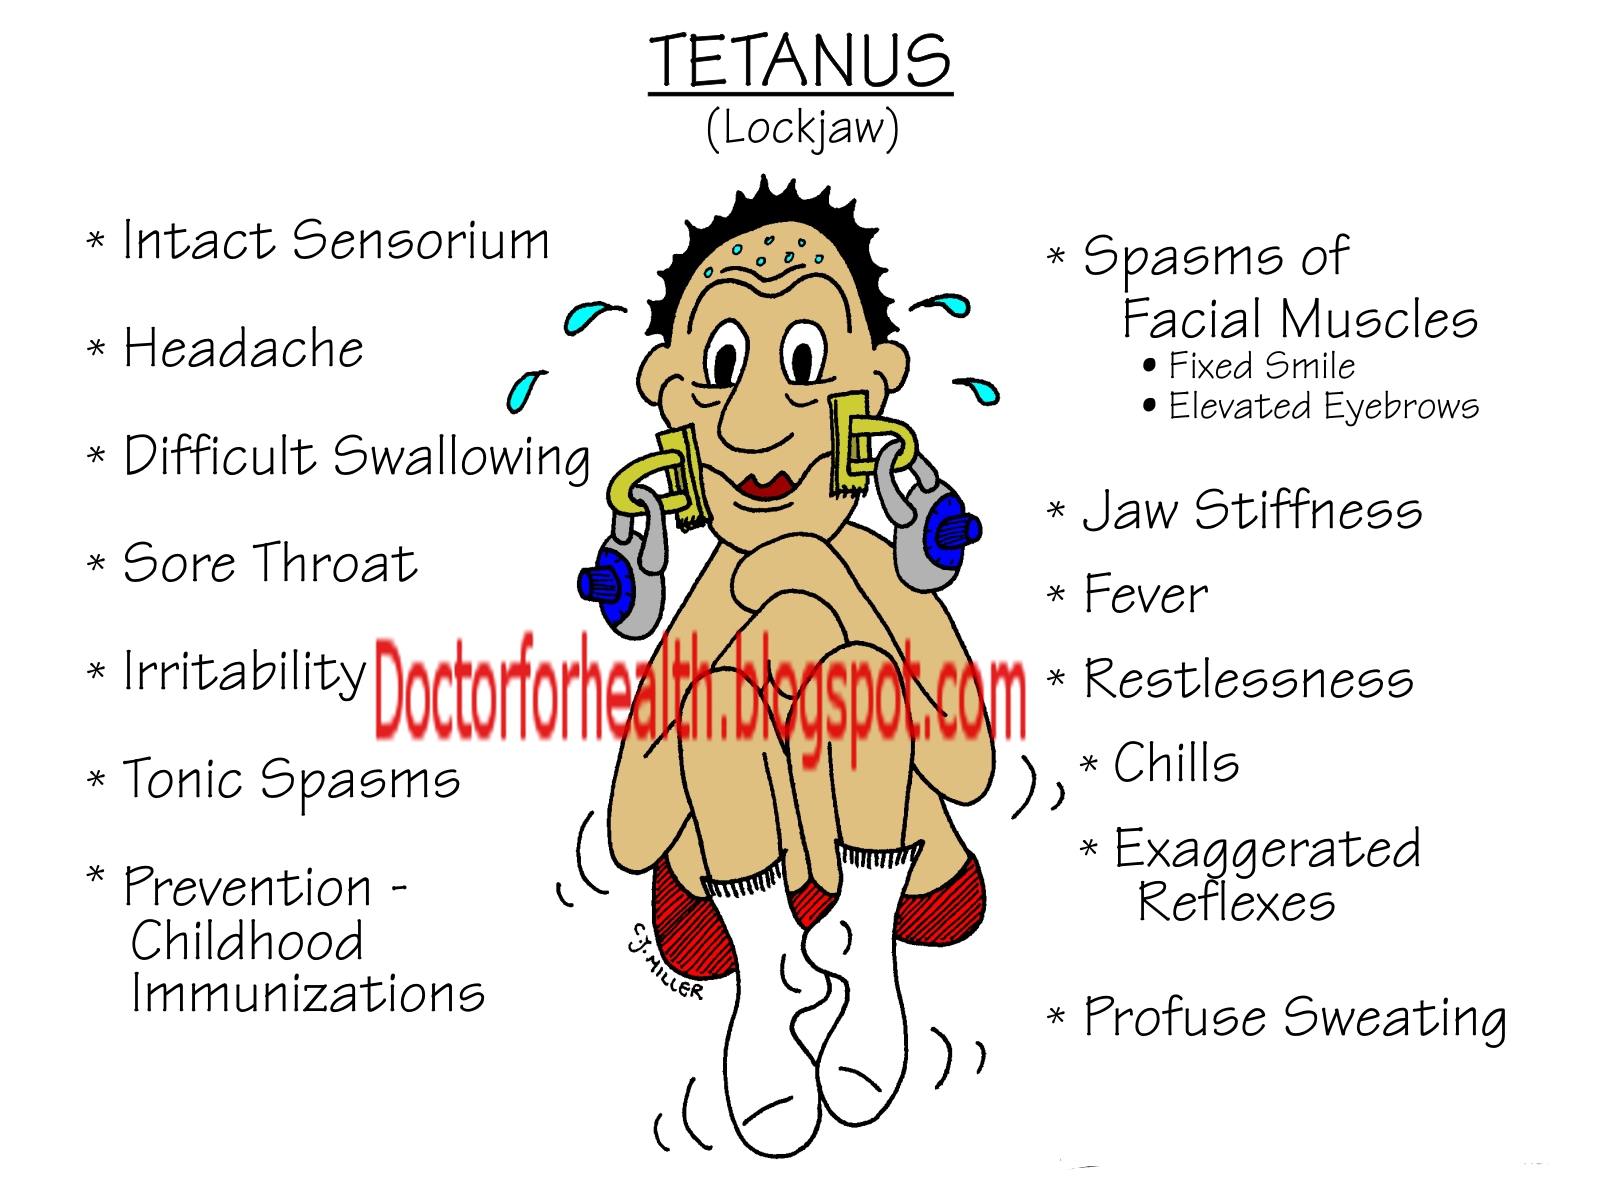 What are some signs of tetanus?